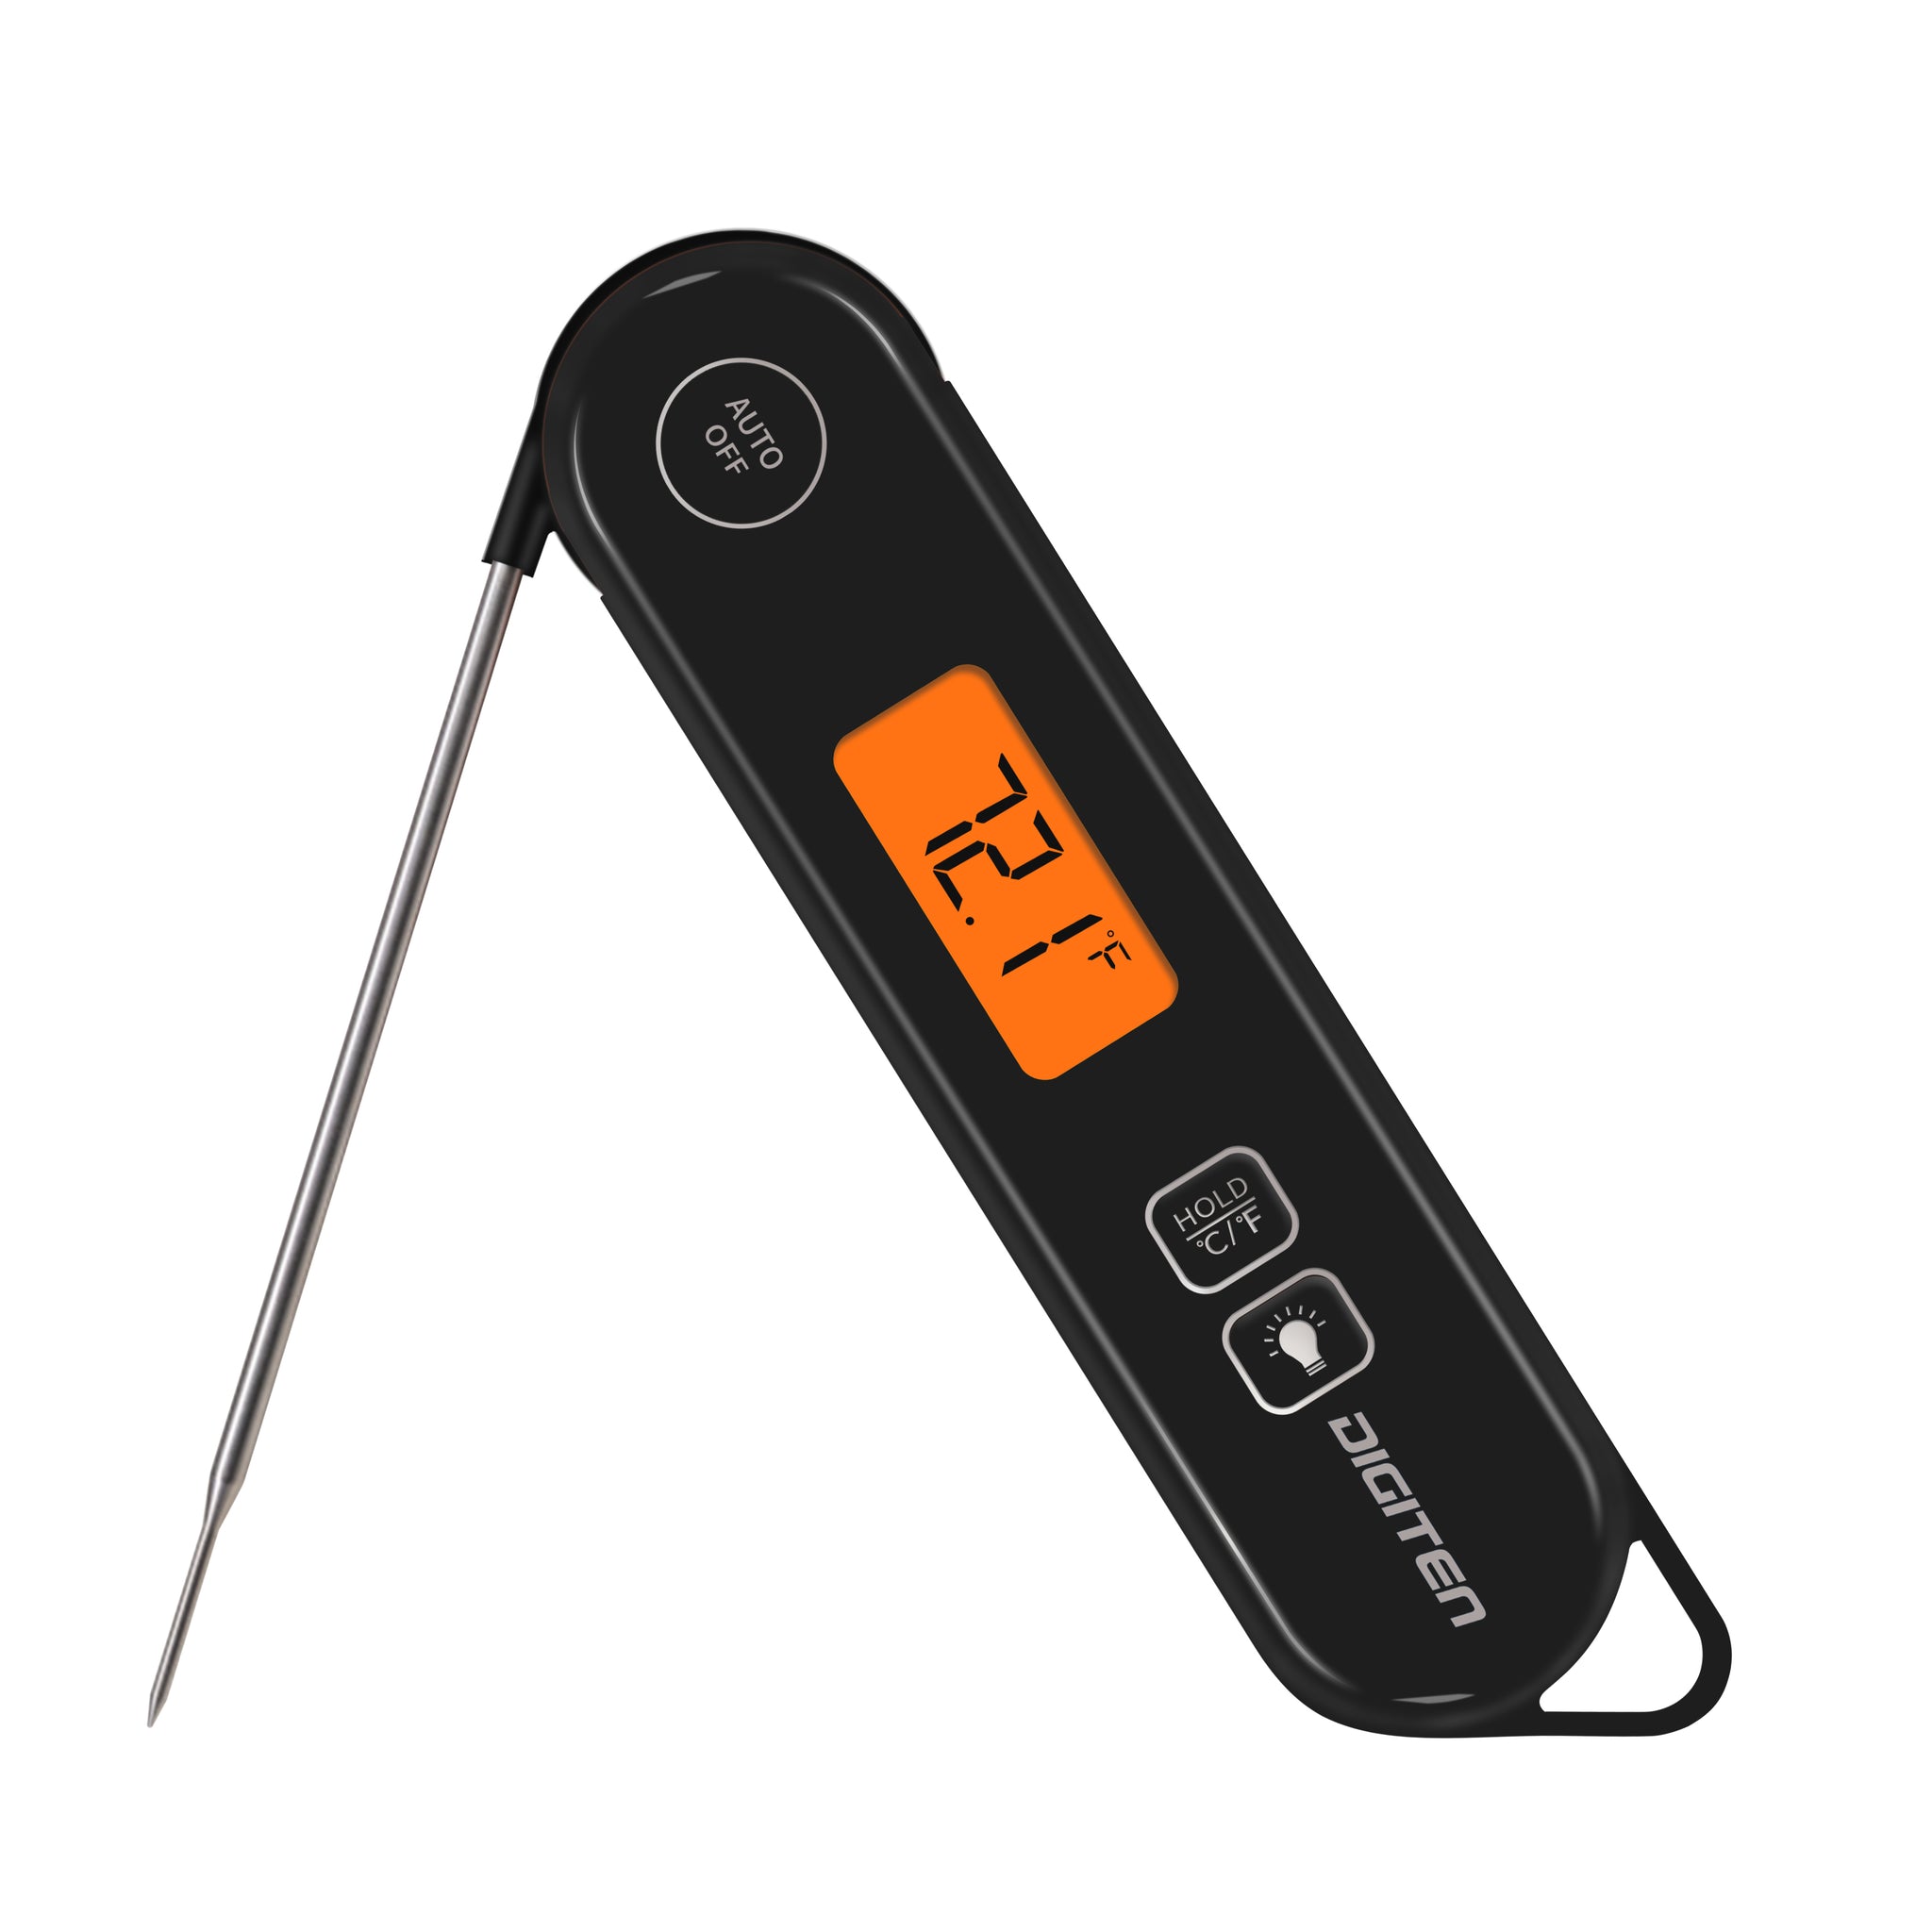 Digital Instant Read Meat Thermometer - Waterproof Kitchen Food Cooking  Thermometer with Backlight LCD - Best Super Fast Electric Meat Thermometer  Probe for BBQ Grilling Smoker Baking Turkey 